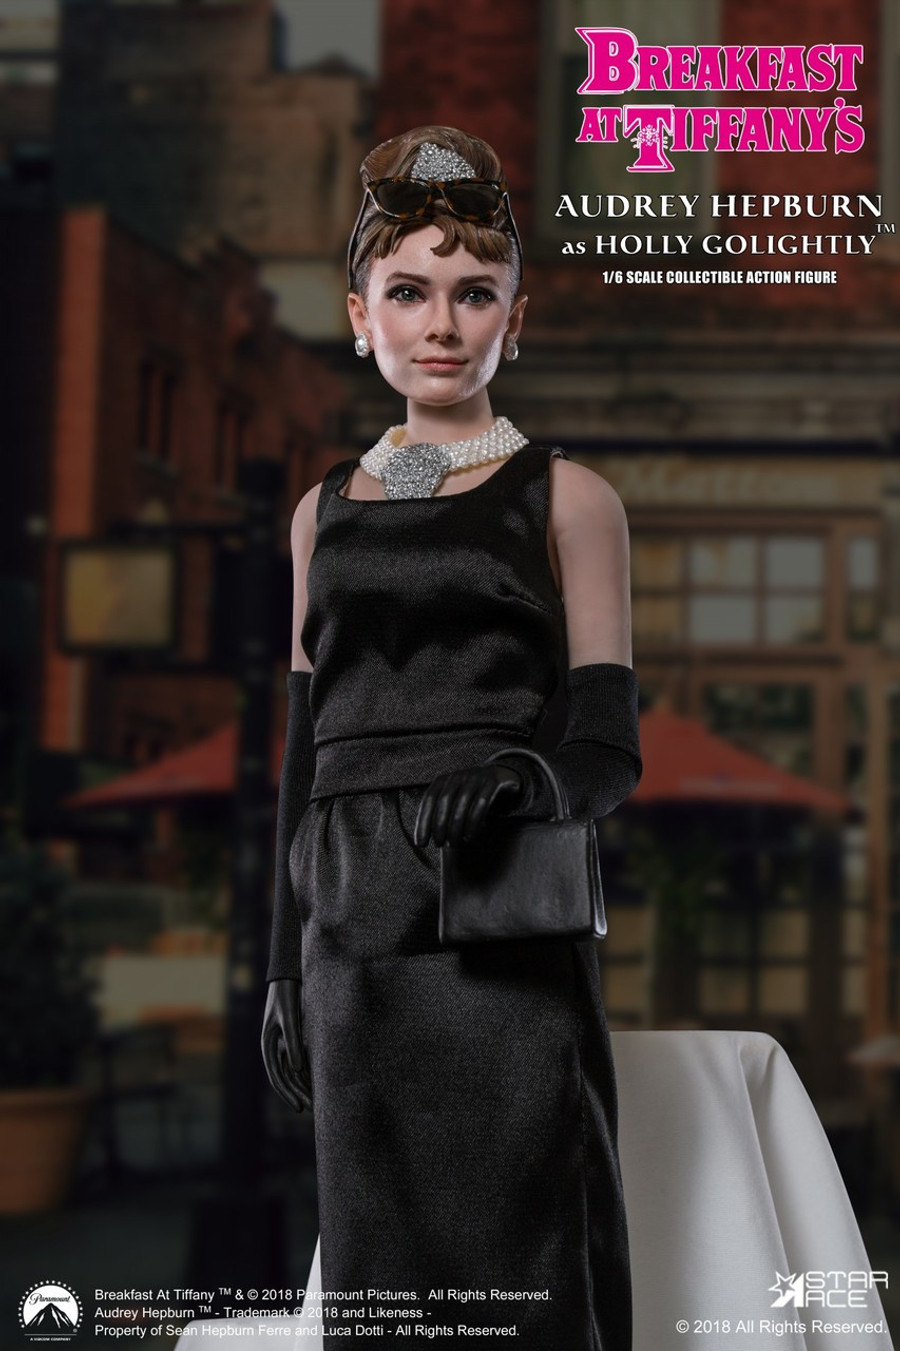 Star Ace - Audrey Hepburn as Holly Golightly Deluxe Version